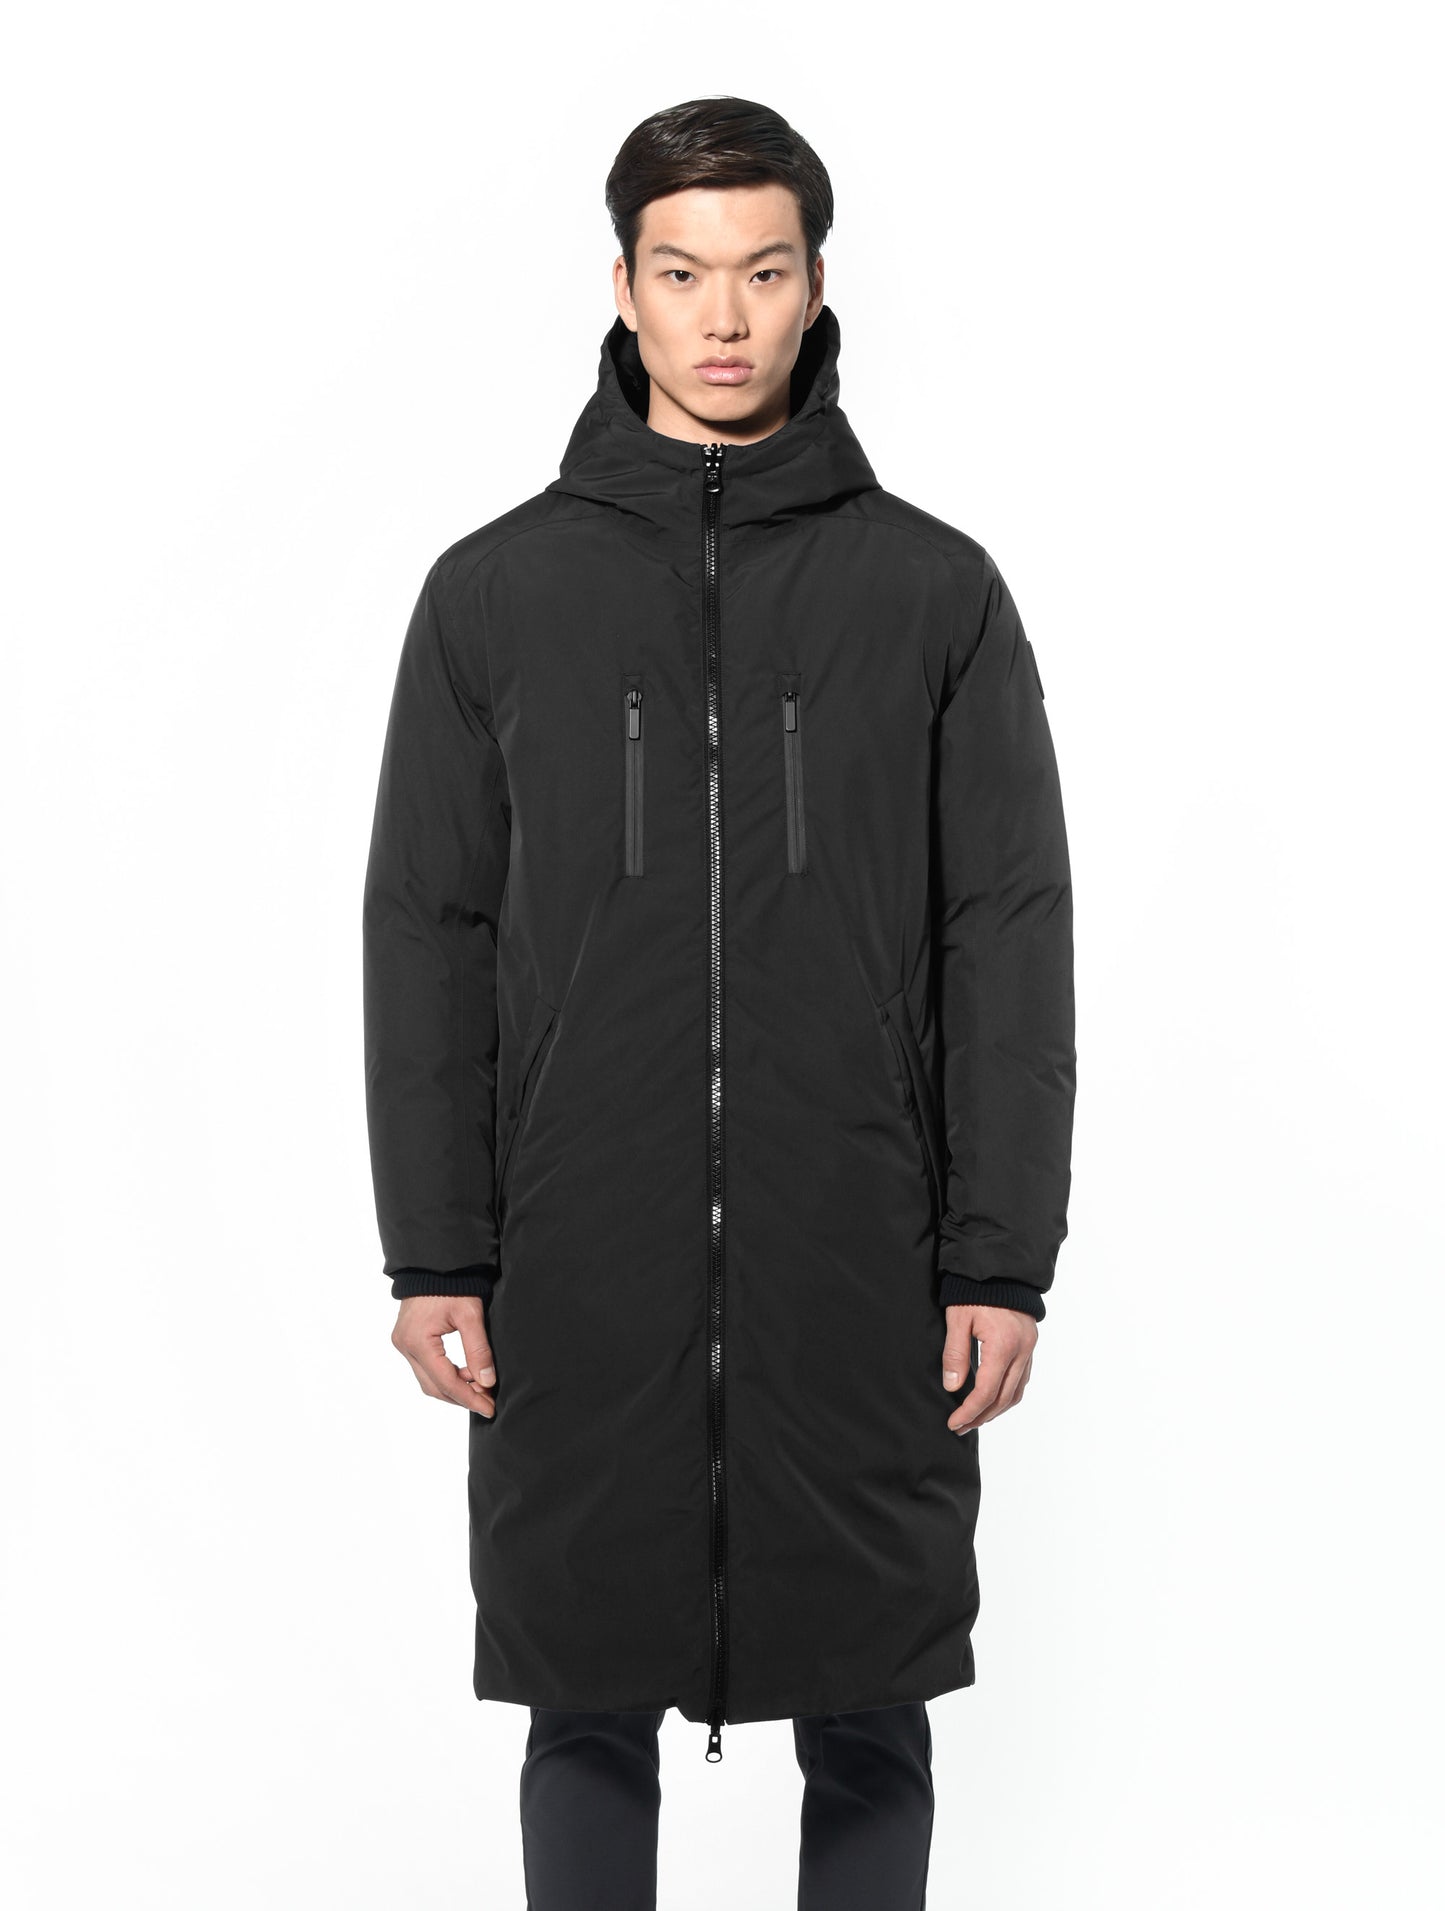 Men's knee length reversible down-filled parka with non-removable hood in Black